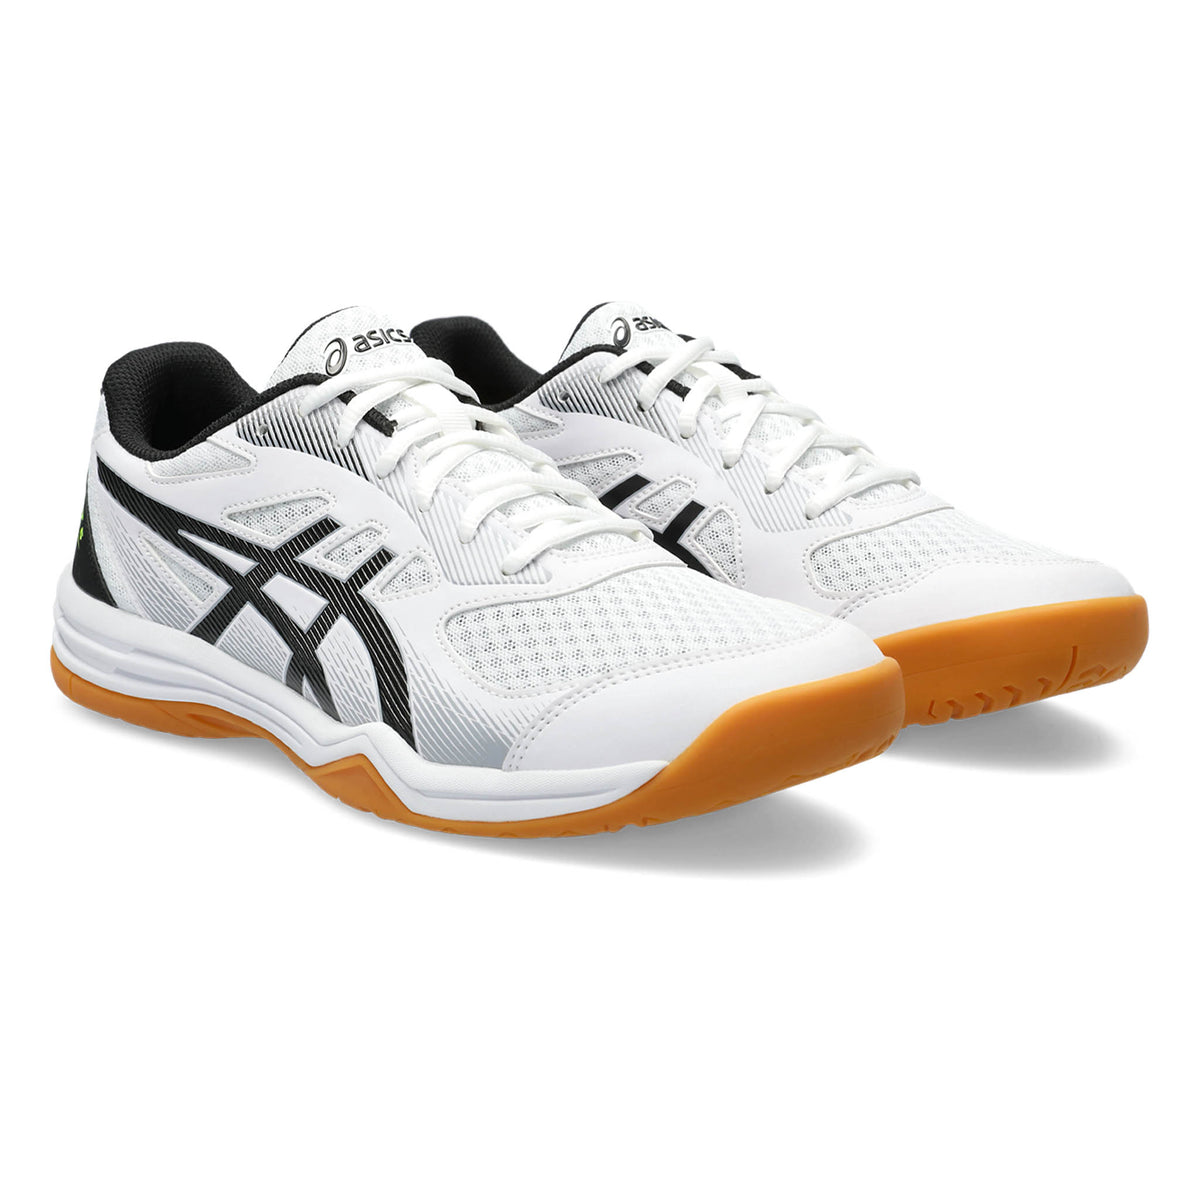 Asics Upcourt 5 Mens Indoor Court Shoes: White/Safety Yellow